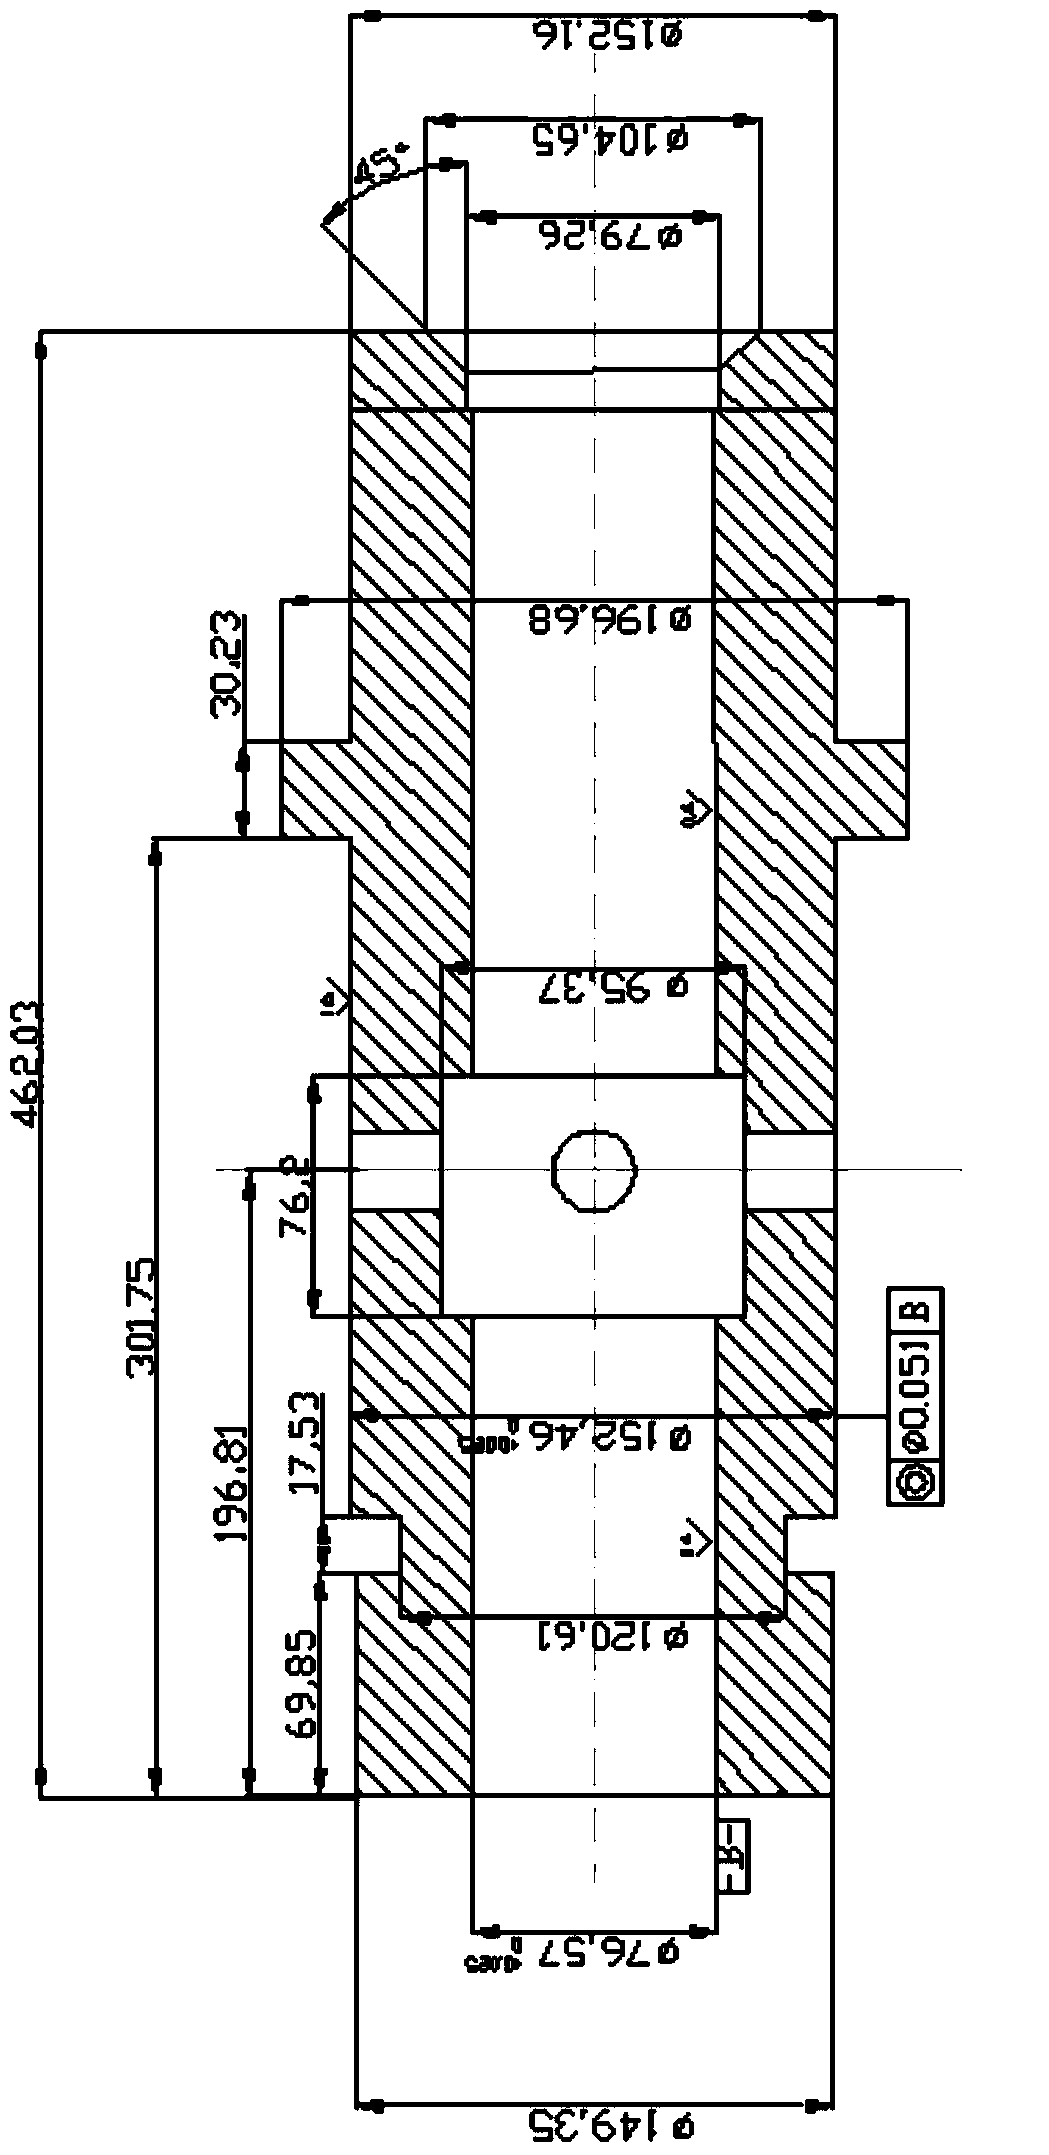 Method for rough turning turbine seal sleeve made of high-temperature alloy GH901